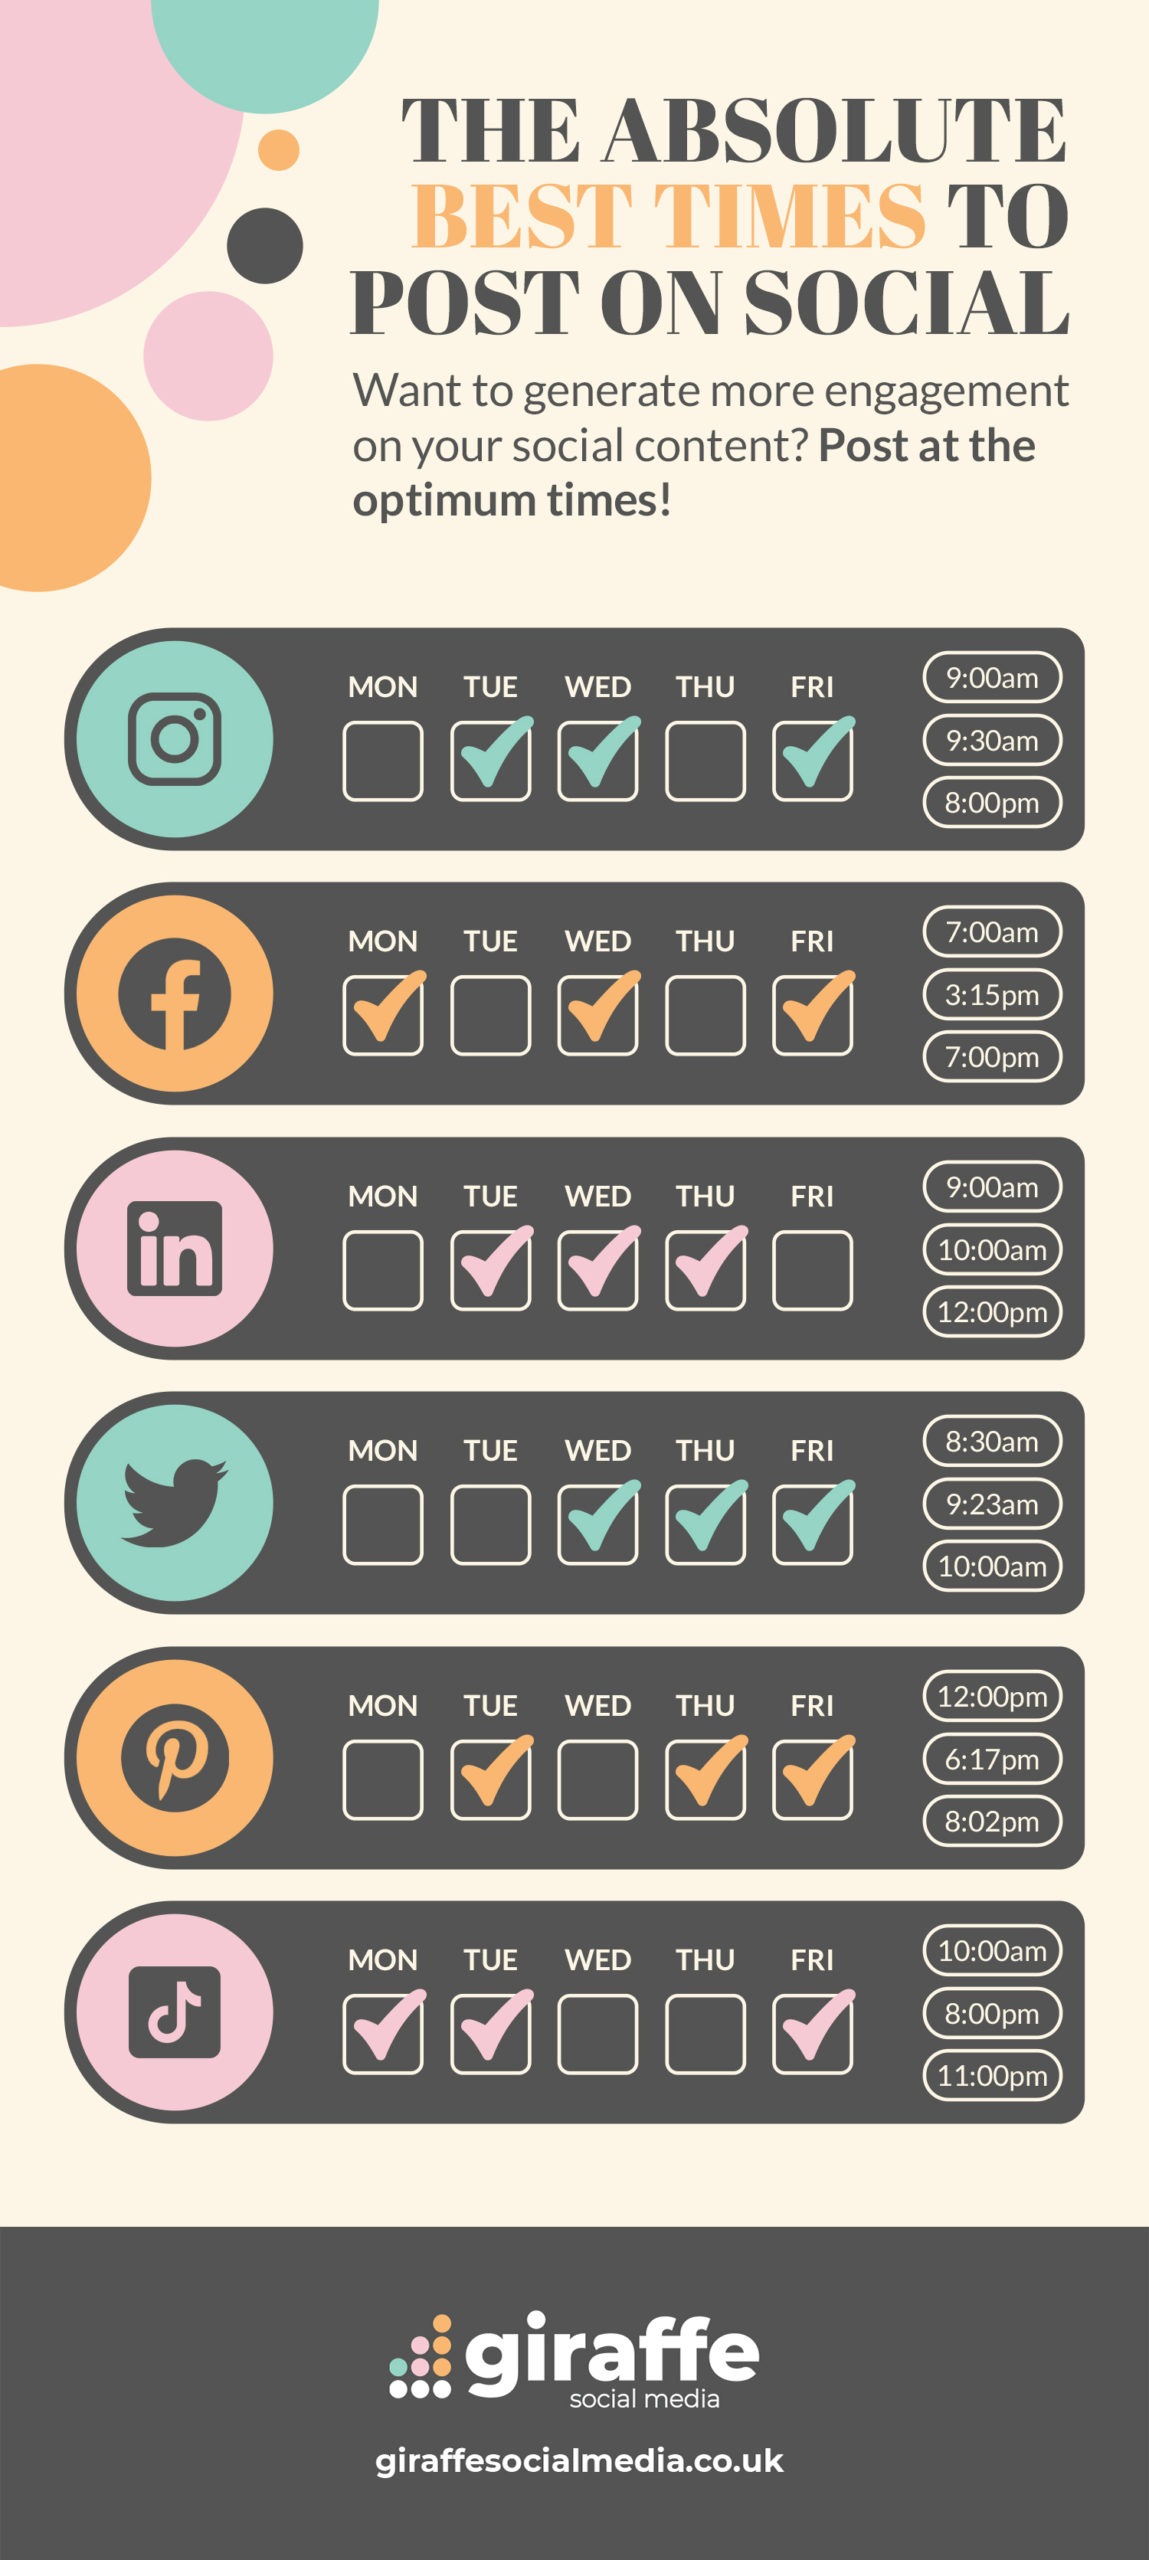 The Absolute Best Times to Post on Social Media - Full Infographic